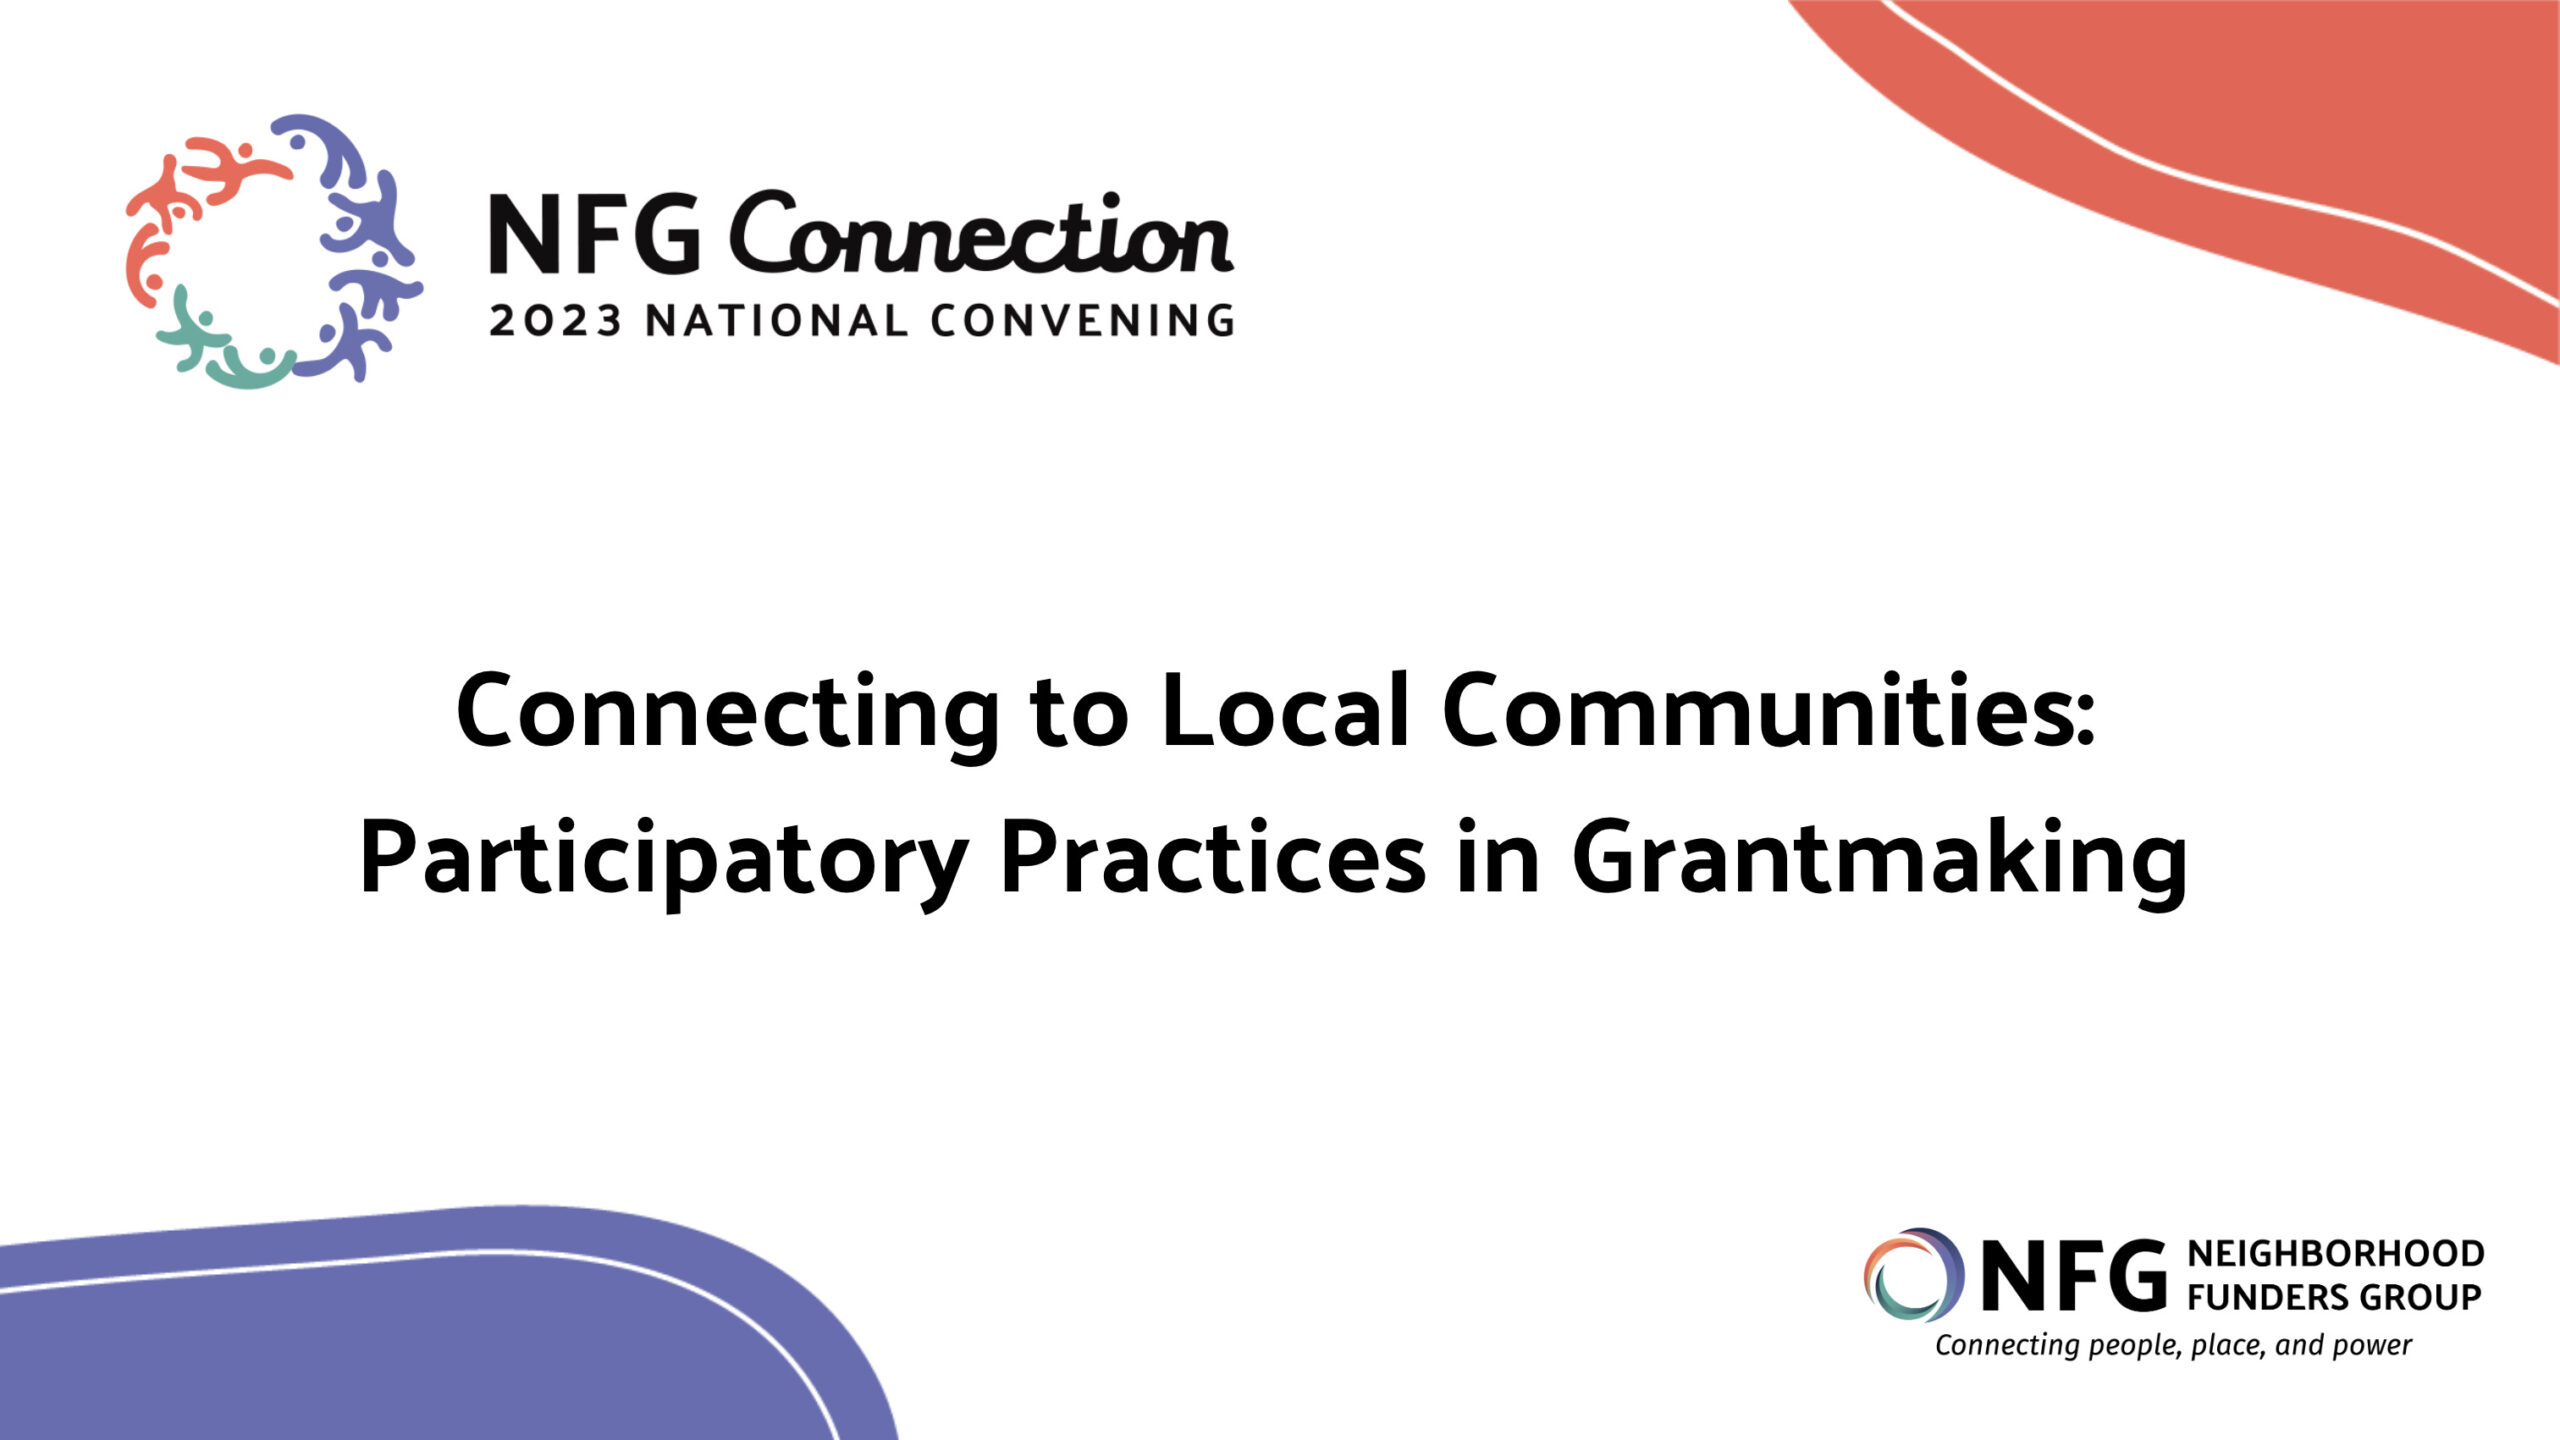 Title card for NFG's 2023 National Convening Plenary 2: "Connecting to Local Communities: Participatory Practices in Grantmaking"